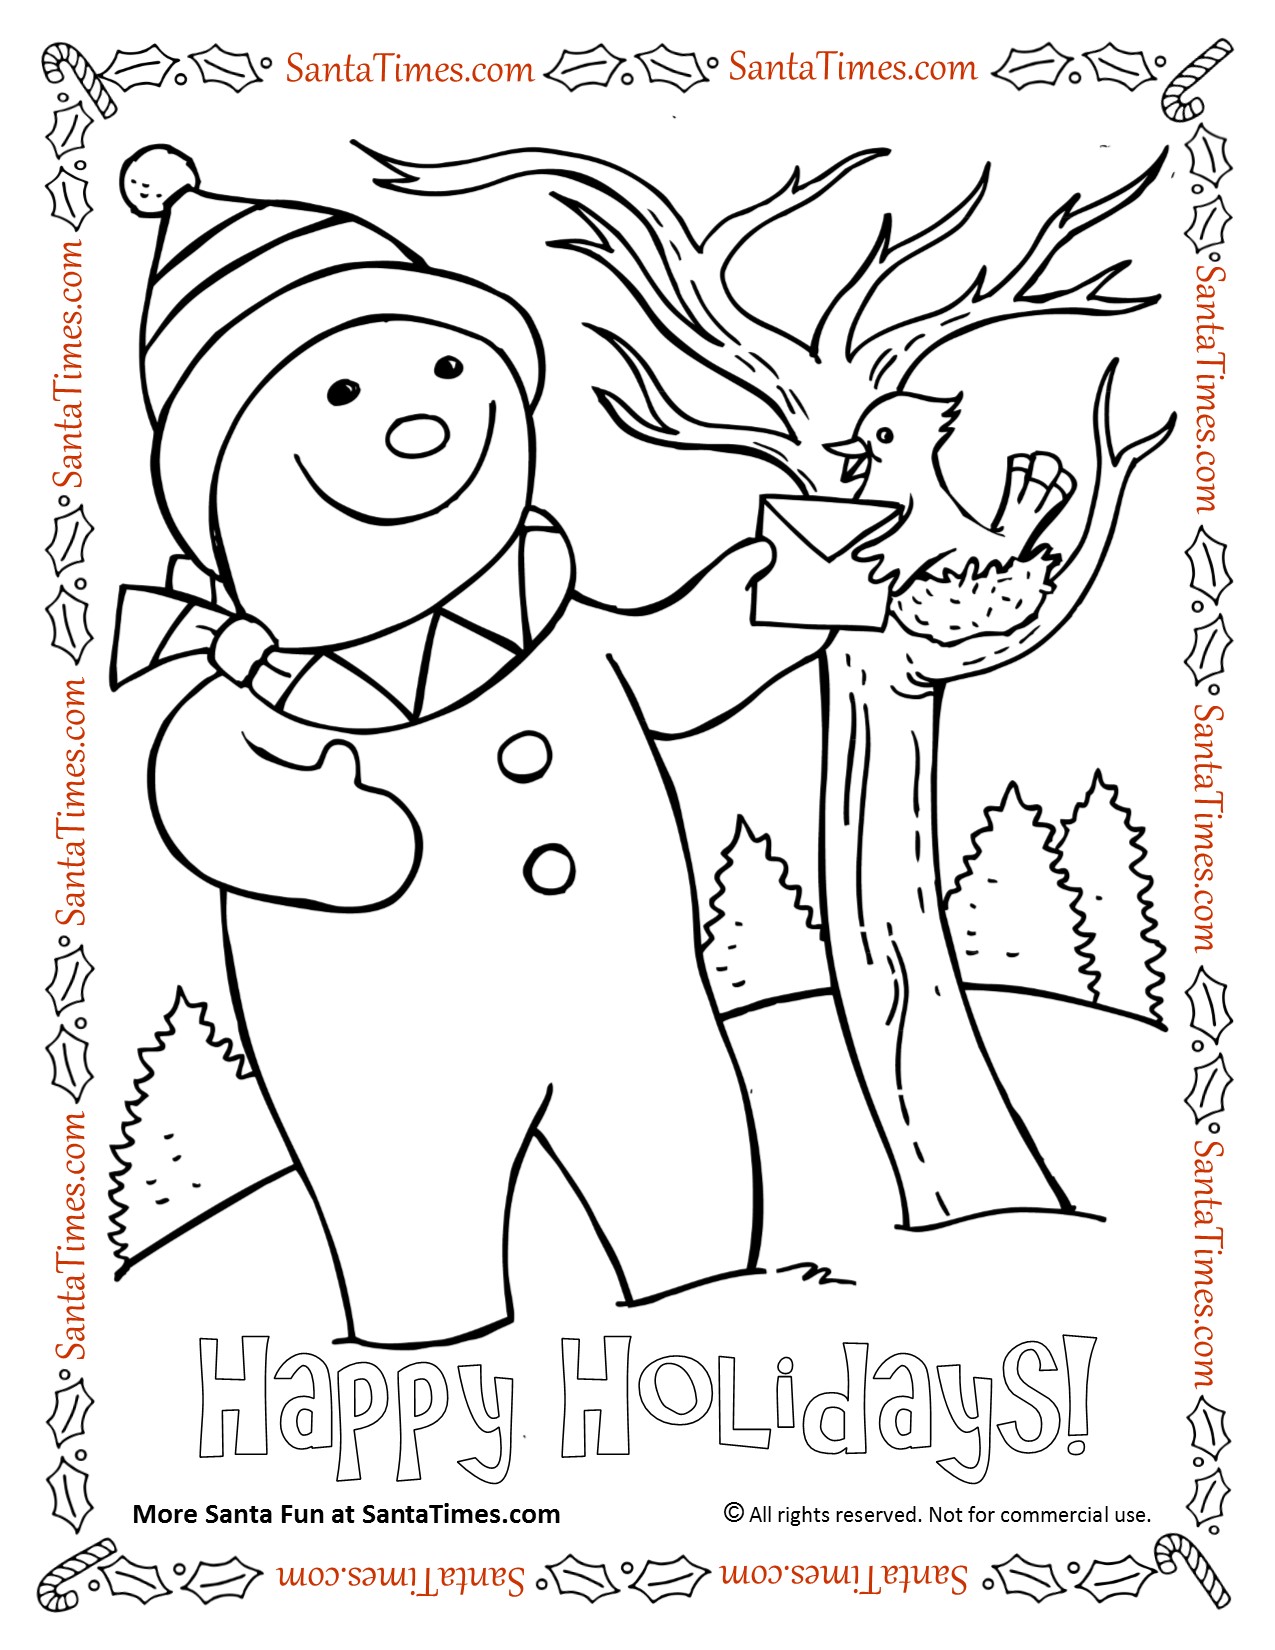 Happy holiday bird and snowman coloring page